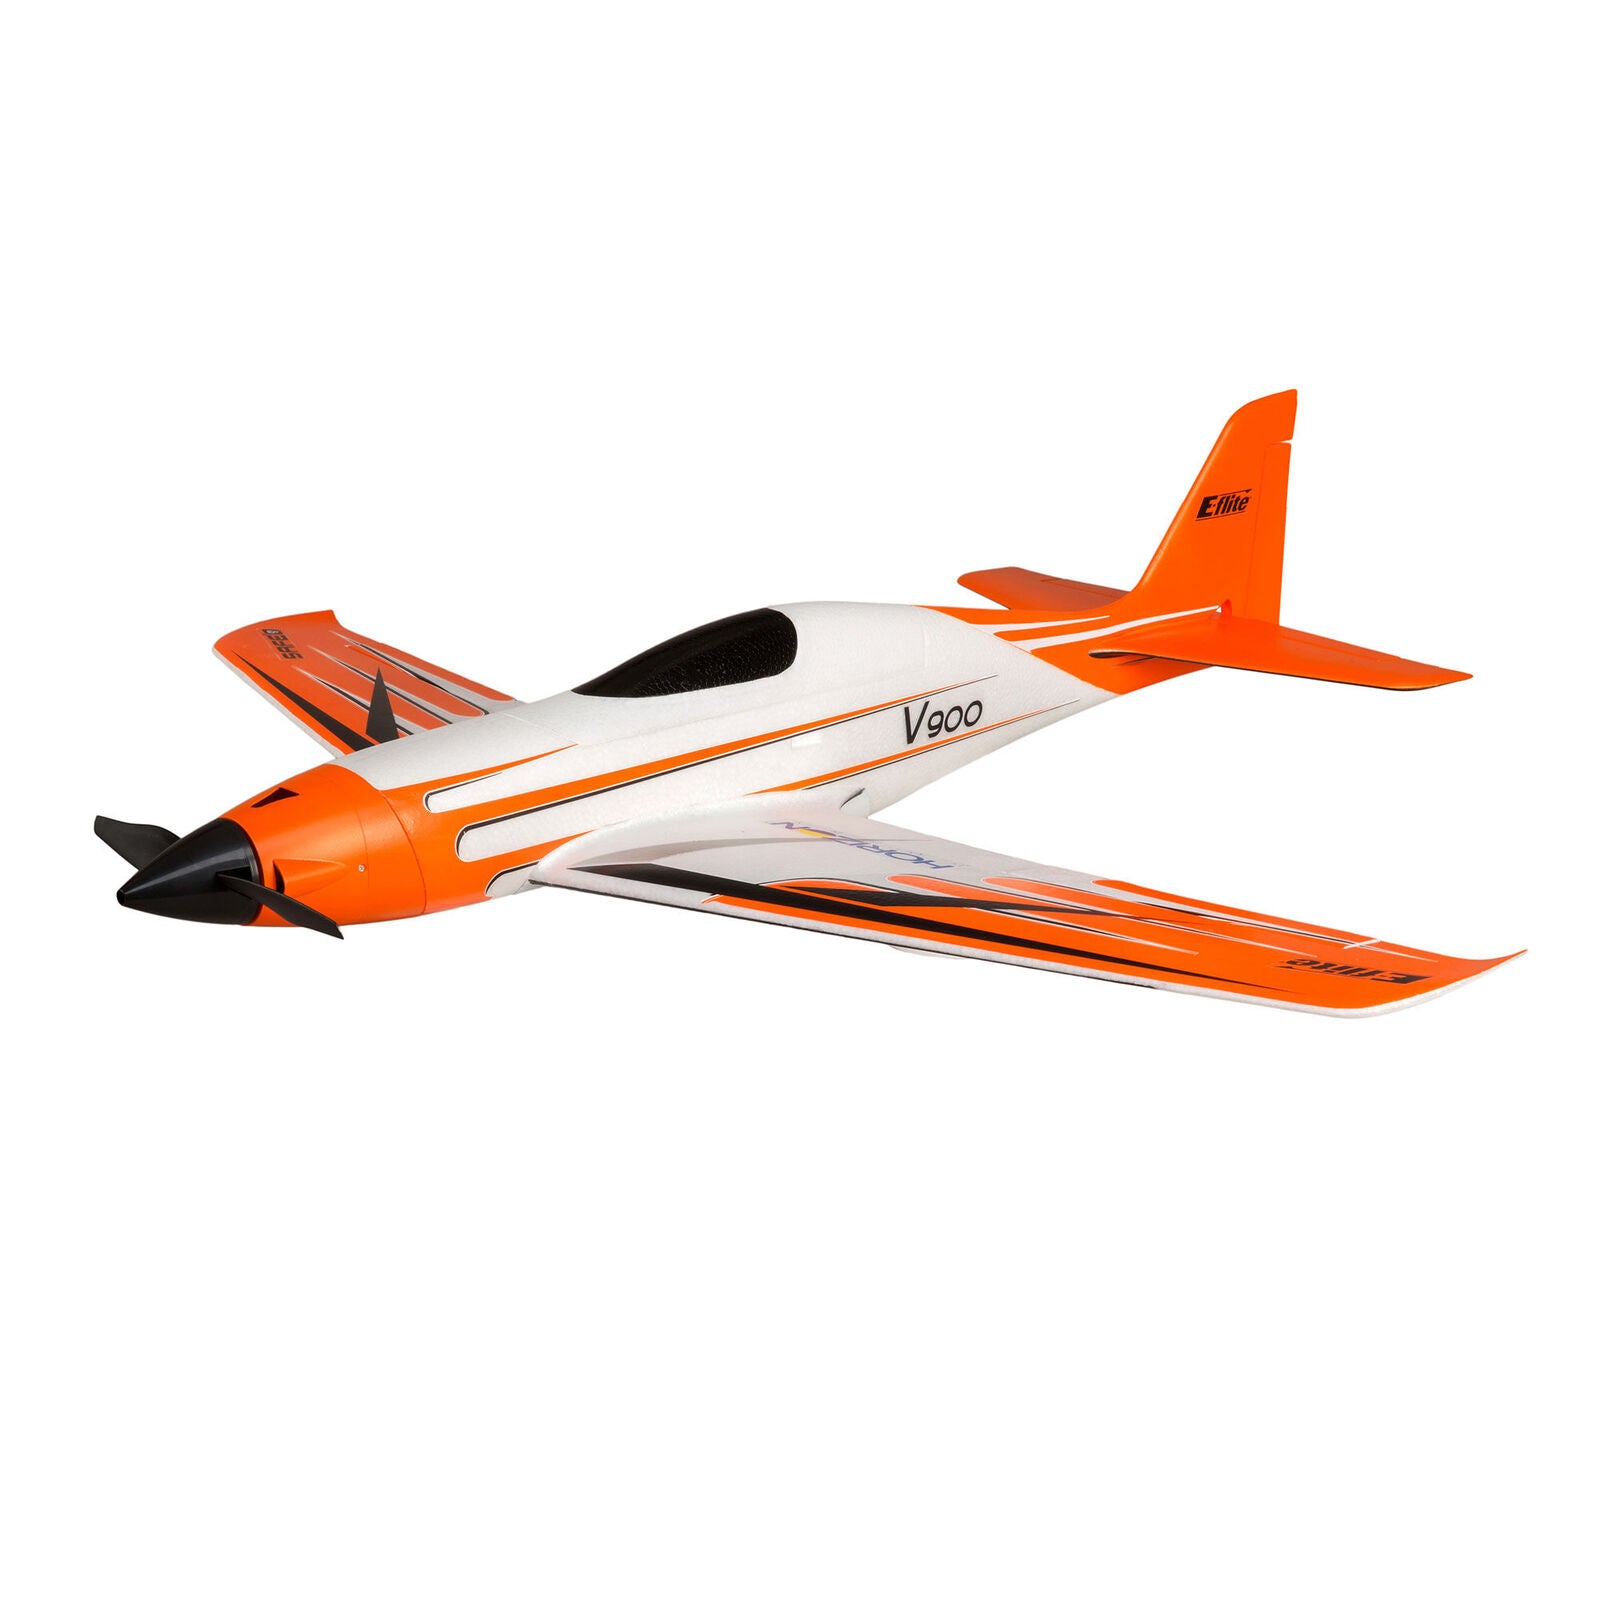 EFLITE EFL74500 V900 BNF Basic with AS3X and SAFE Select, 900mm